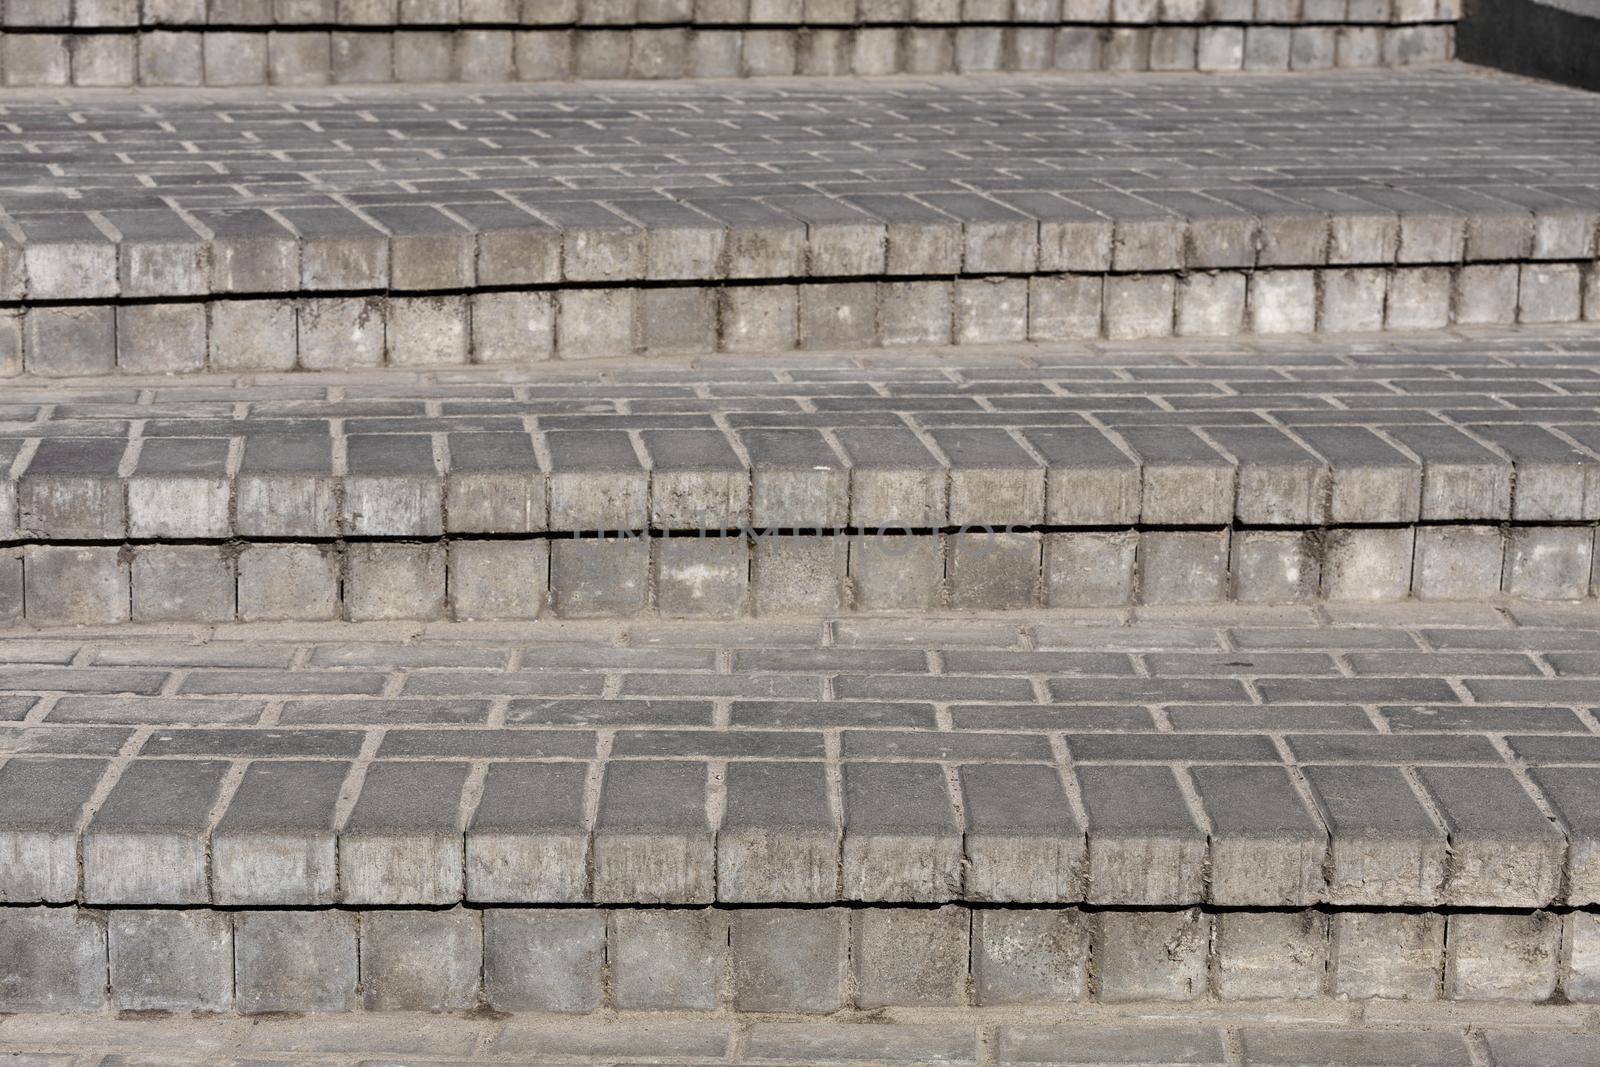 Gray steps from paving slabs laid out in even rows. by Sergii